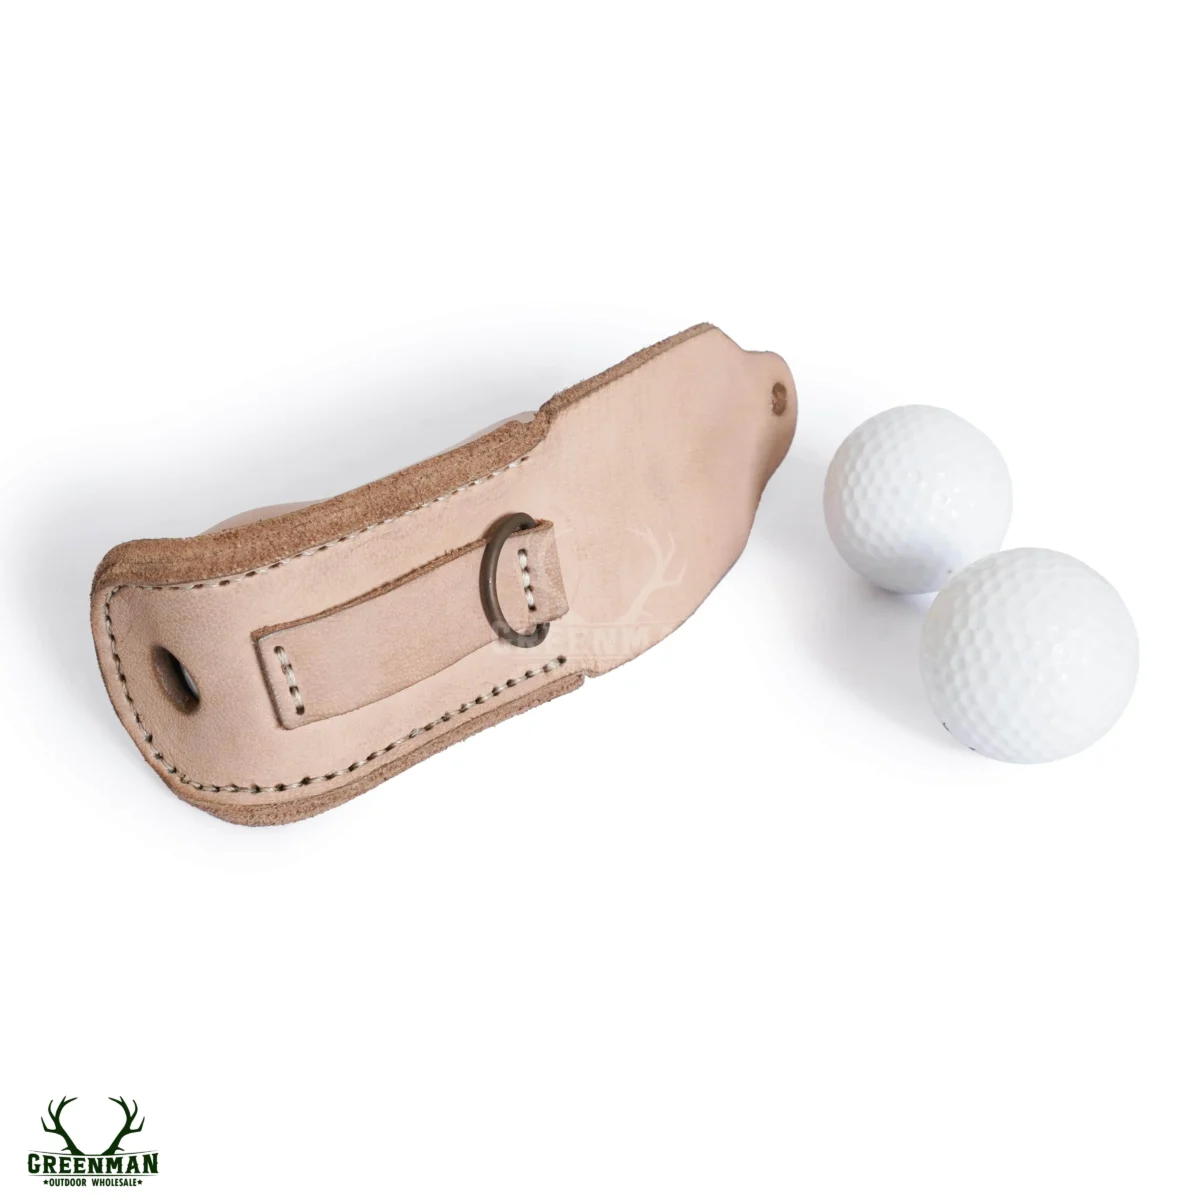 leather golf ball case